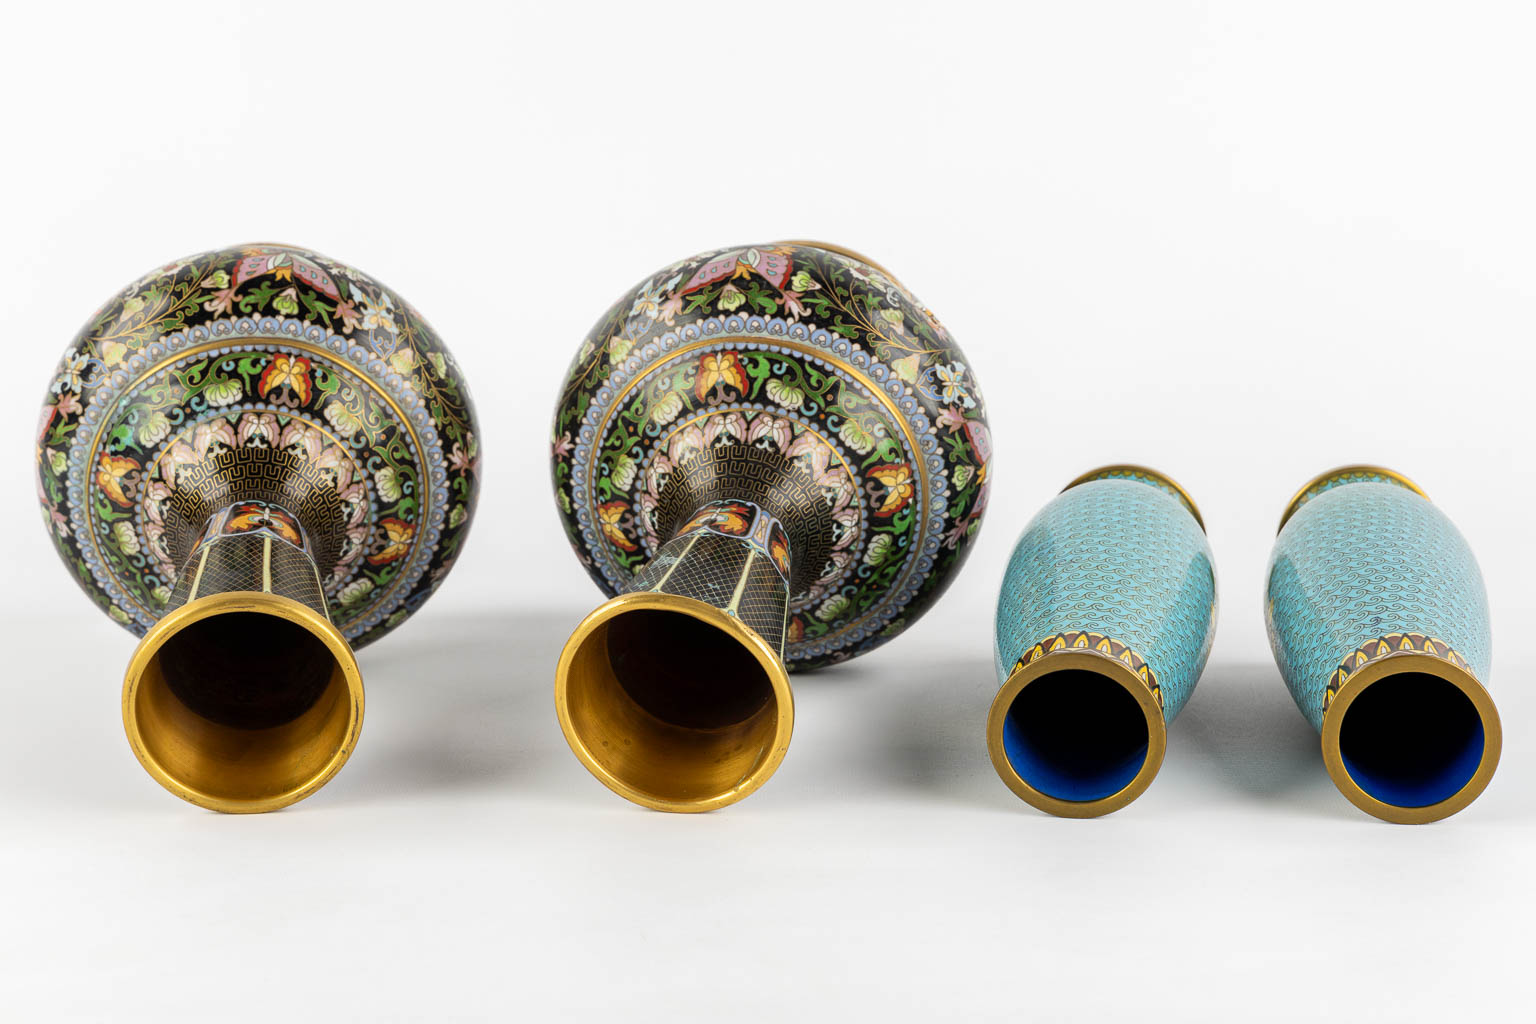 Four pairs of Cloisonné enamel vases, added 1 vase and two small pieces. (H:38 x D:23 cm)